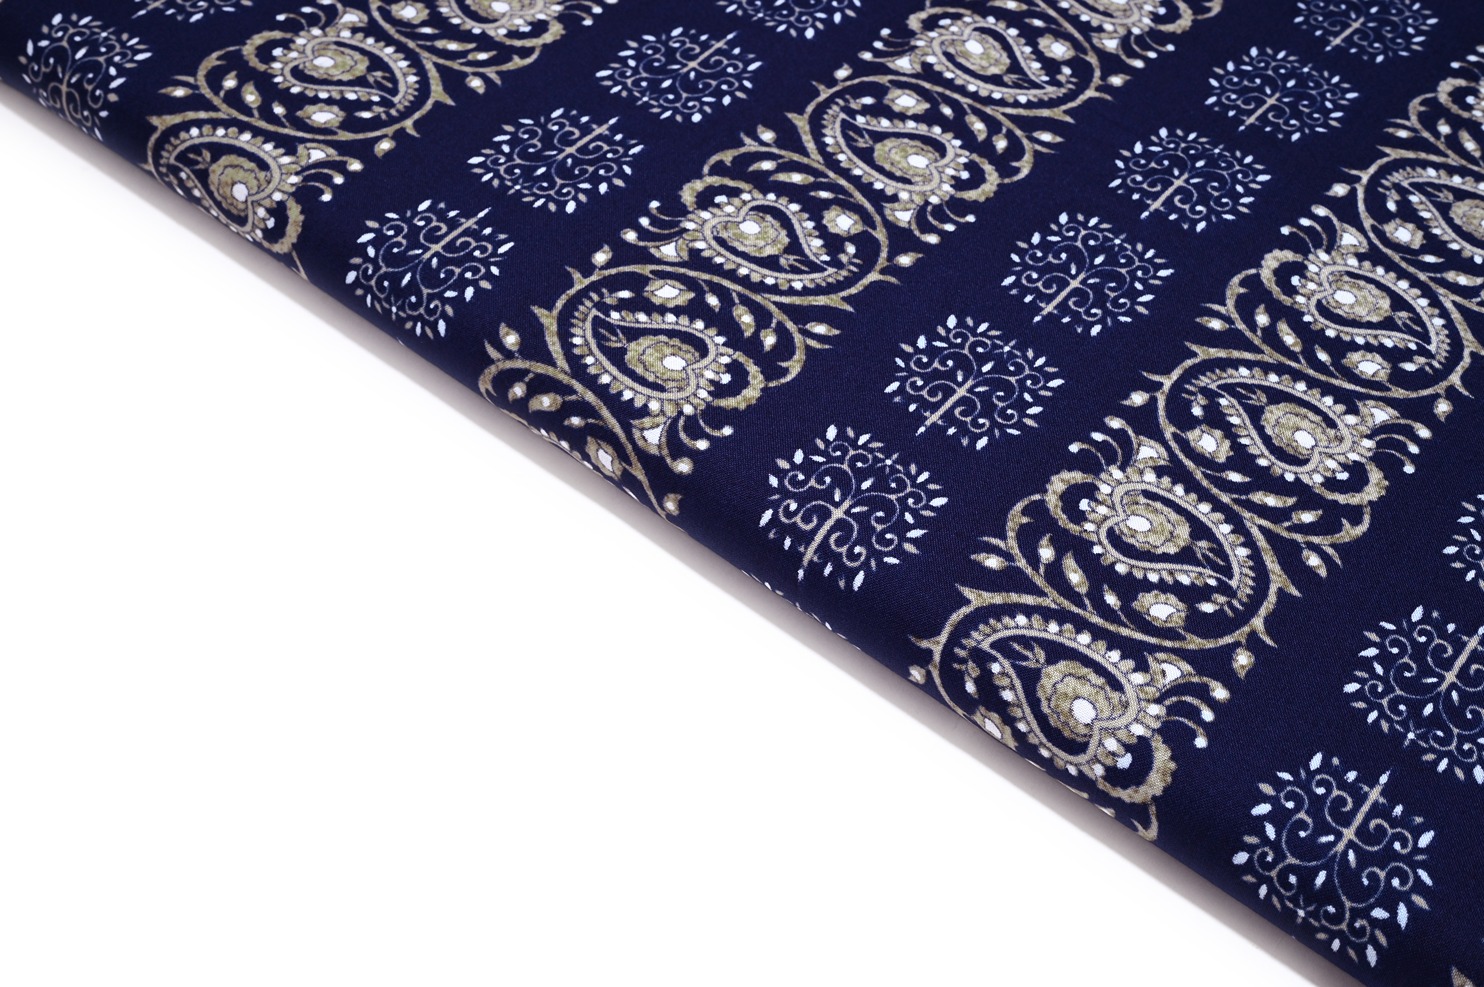 MOONLIGHT NEAVY BLUE COLOR COTTON BLEND RAYON PAISLEY BORDER & GEOMETRIC MOTIVE WITH GOLD FOIL PATTERN PRINTED FABRIC 9068